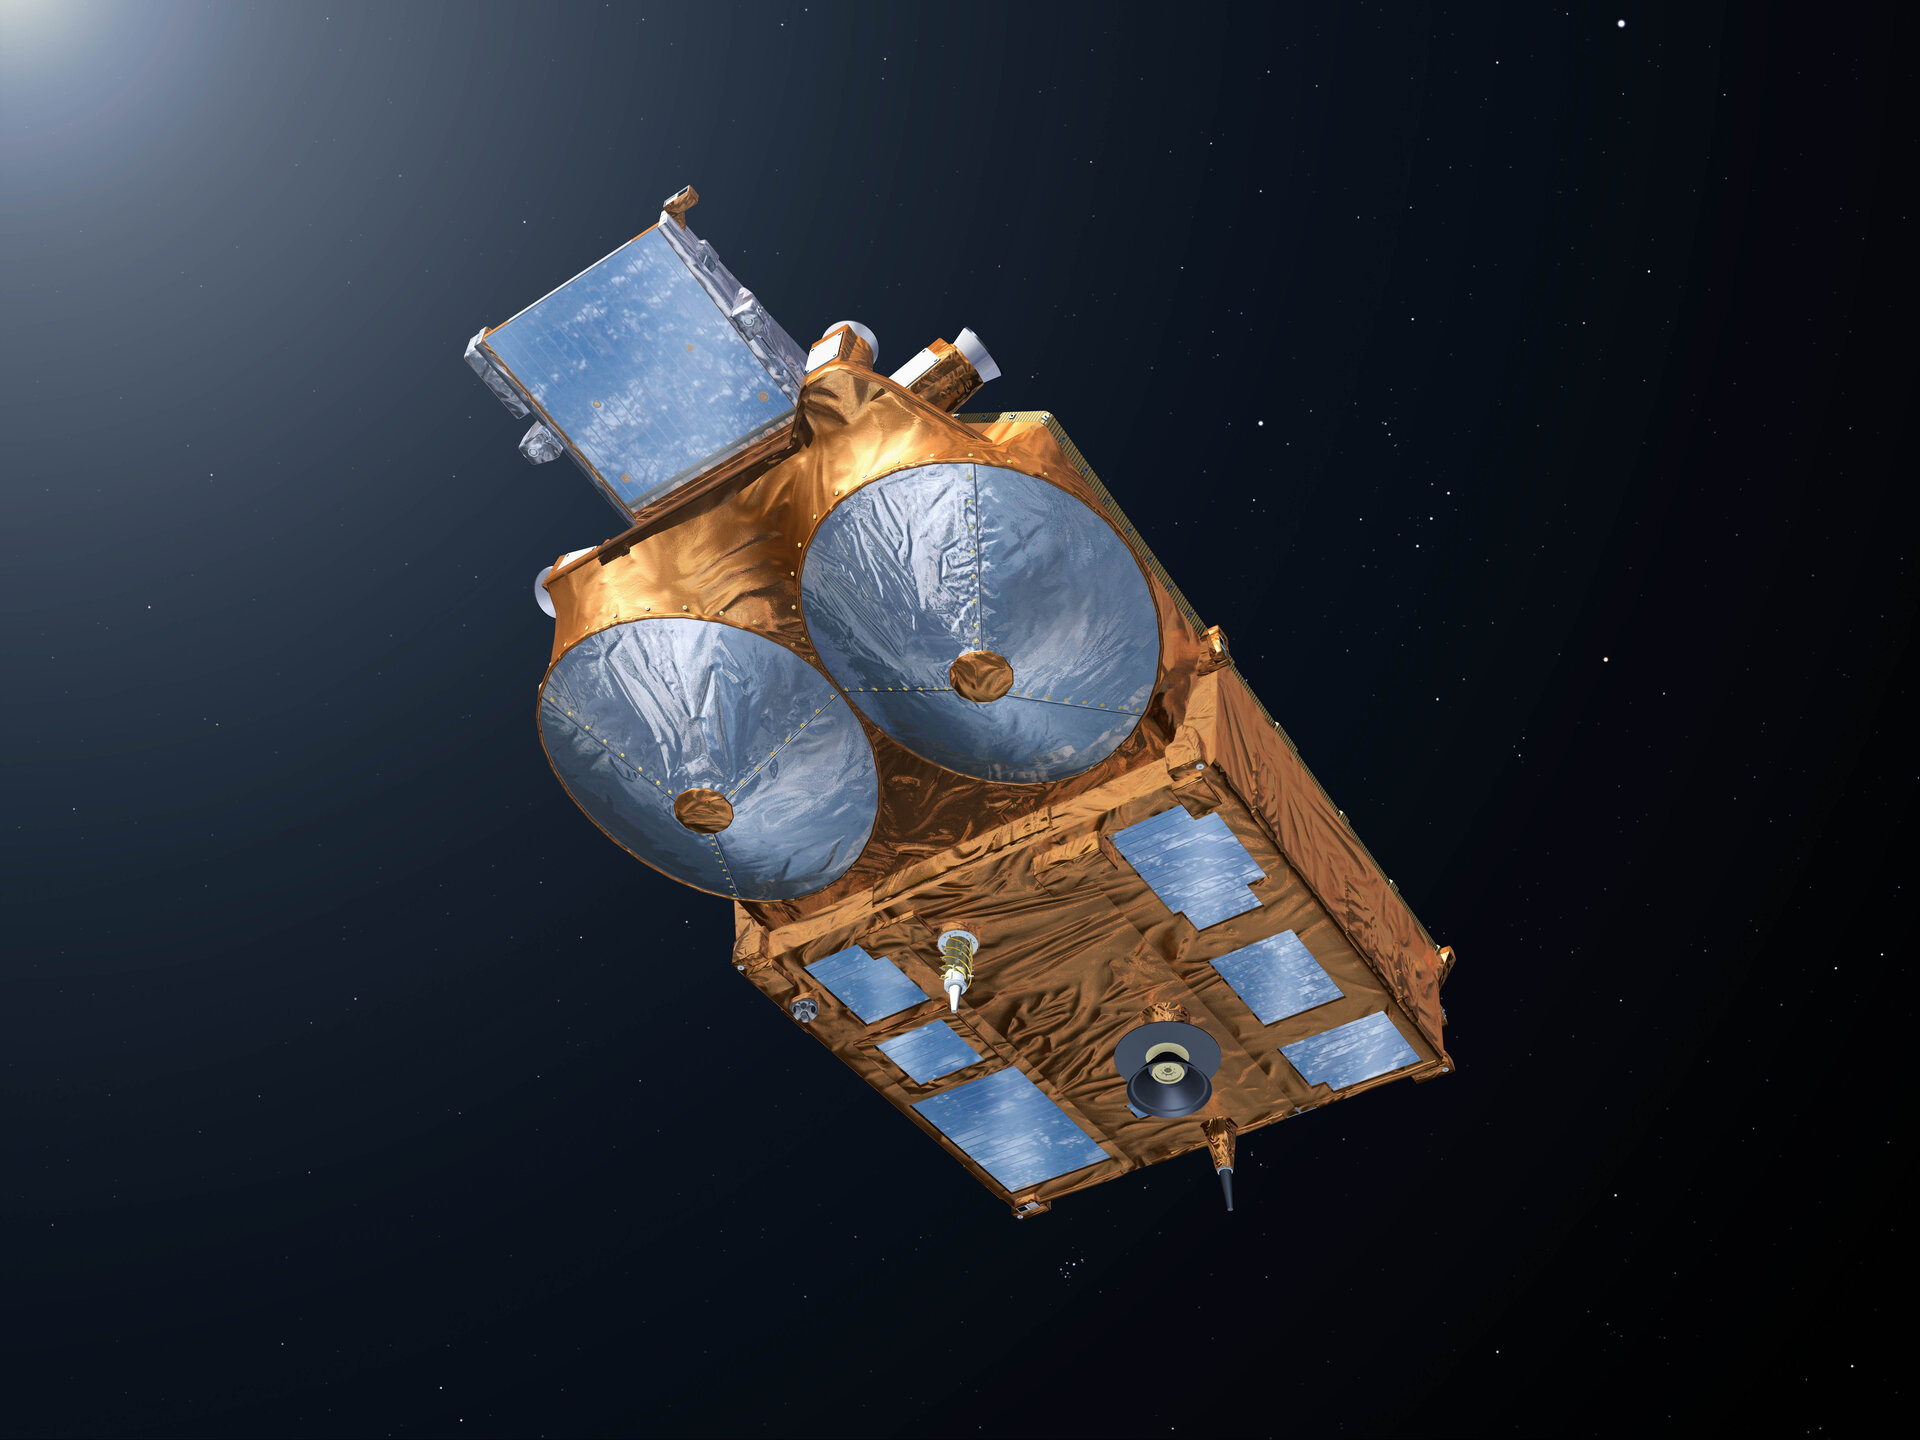 CryoSat seen from underneath